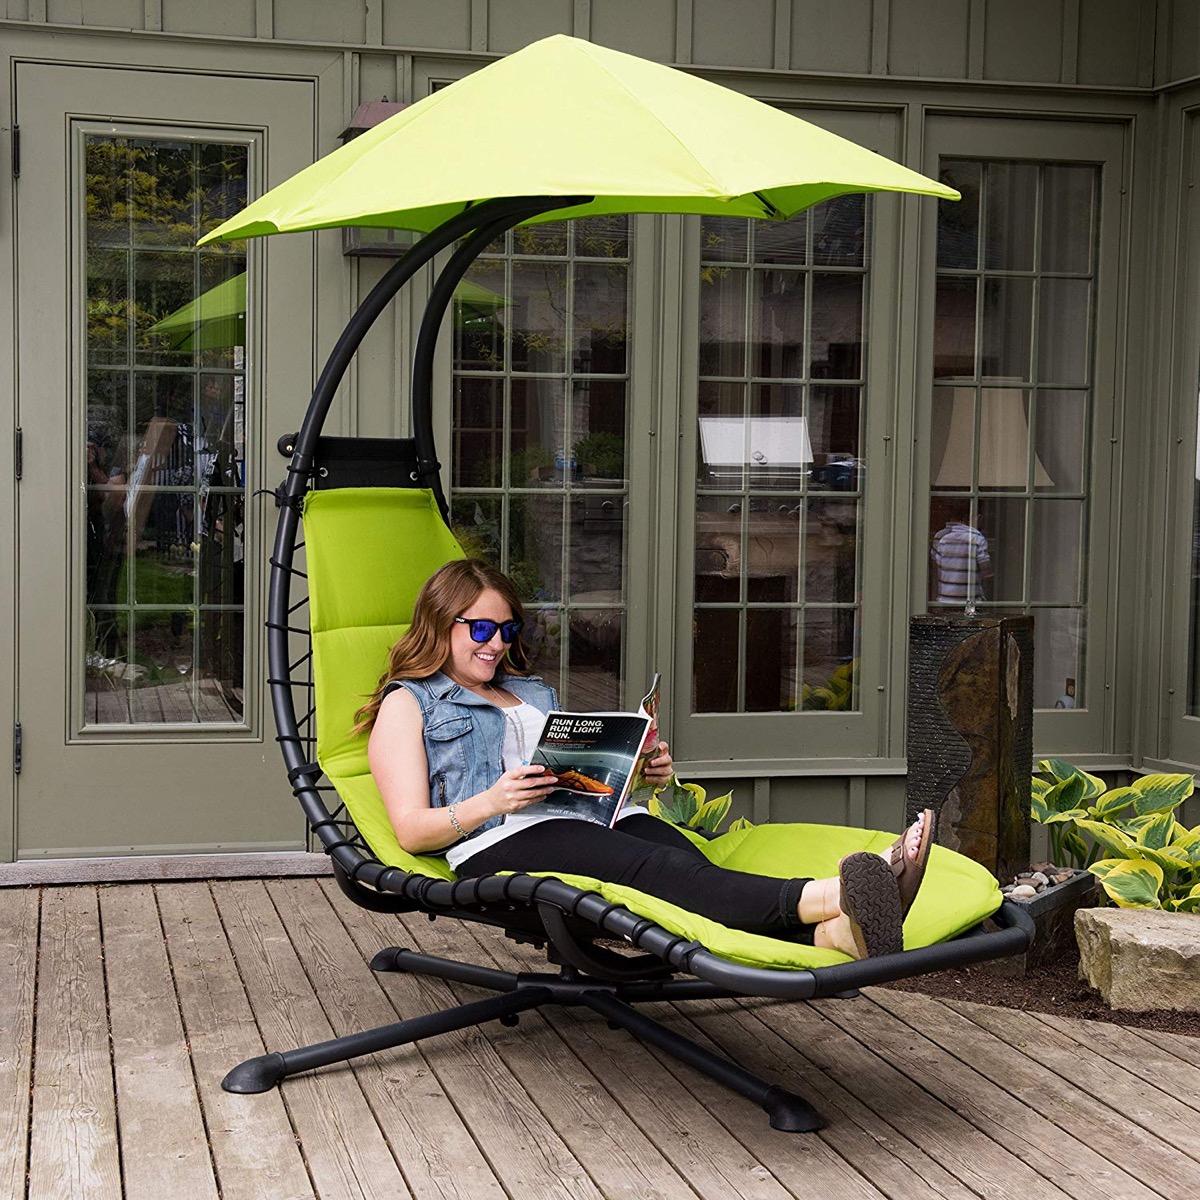 rotating-swivel-outdoor-lounge-chair-with-umbrella-shade | Interior